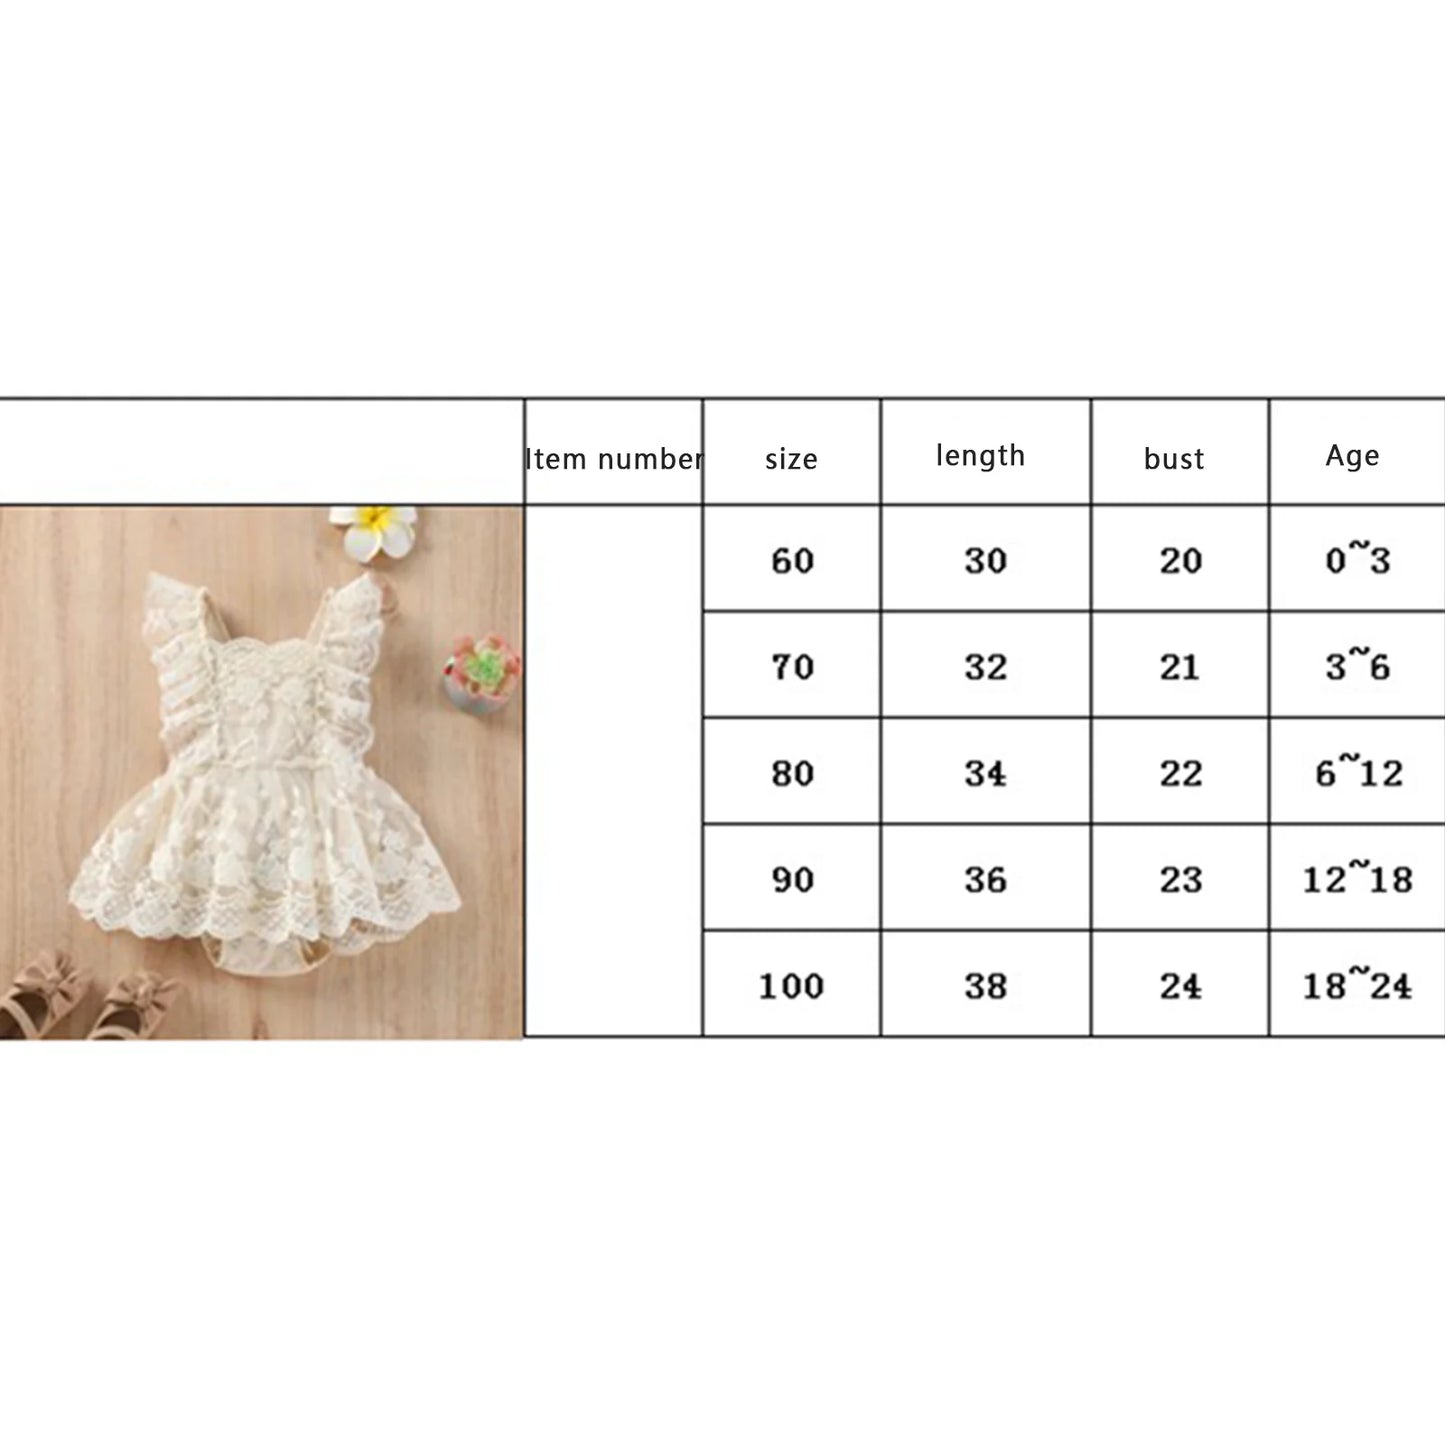 Cute Baby Girls Summer Romper Plain Floral Lace Embroidery Romper Dress Skirt Layered Straps Snap Triangle-Bottom Jumpsuit